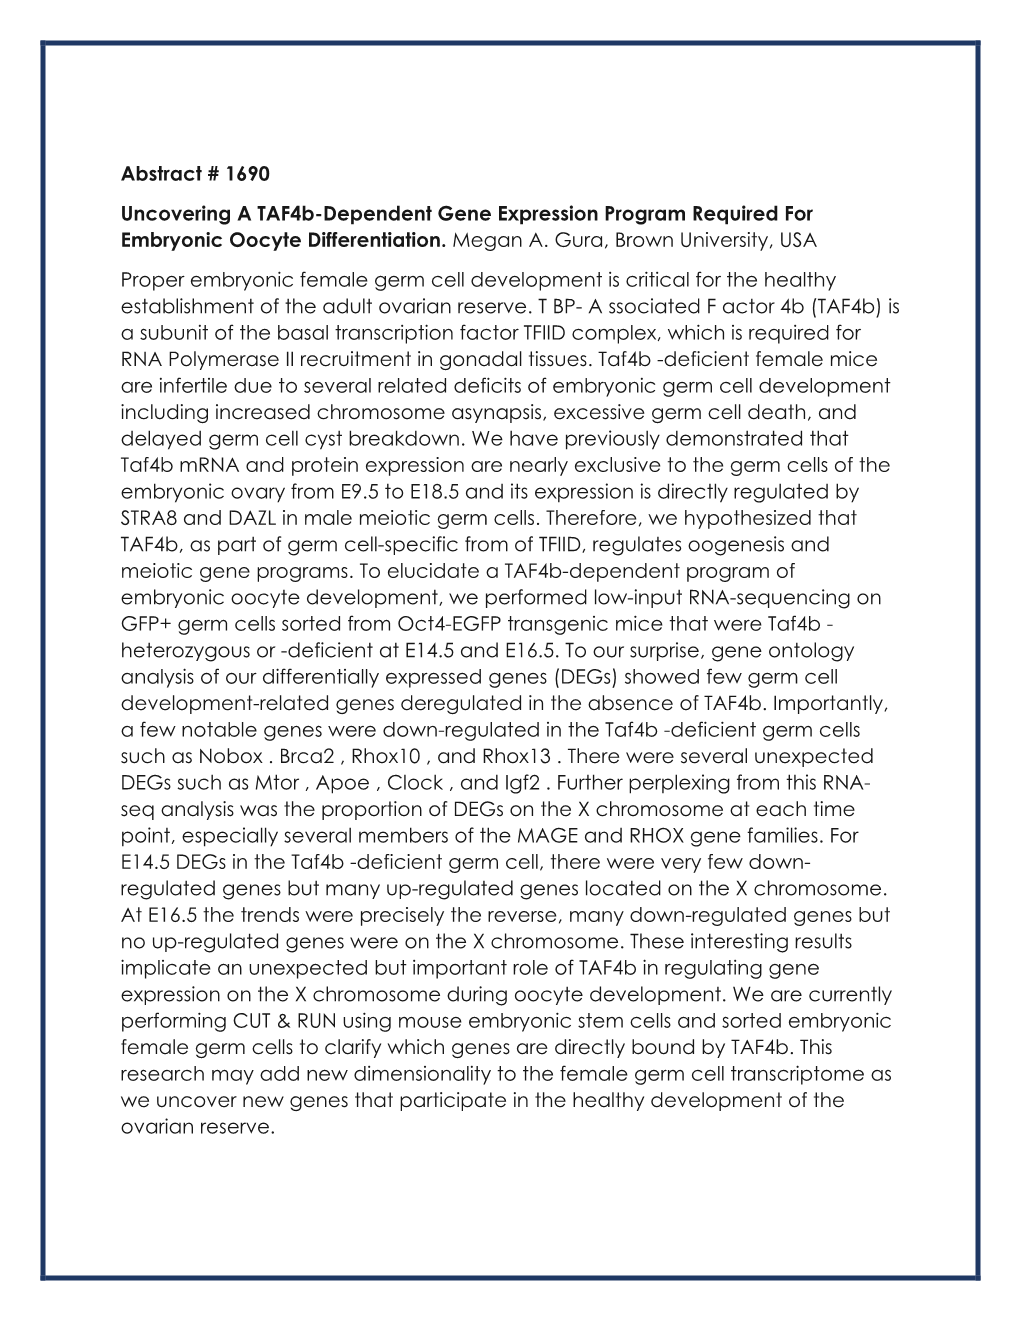 Abstract # 1690 Uncovering a Taf4b-Dependent Gene Expression Program Required for Embryonic Oocyte Differentiation